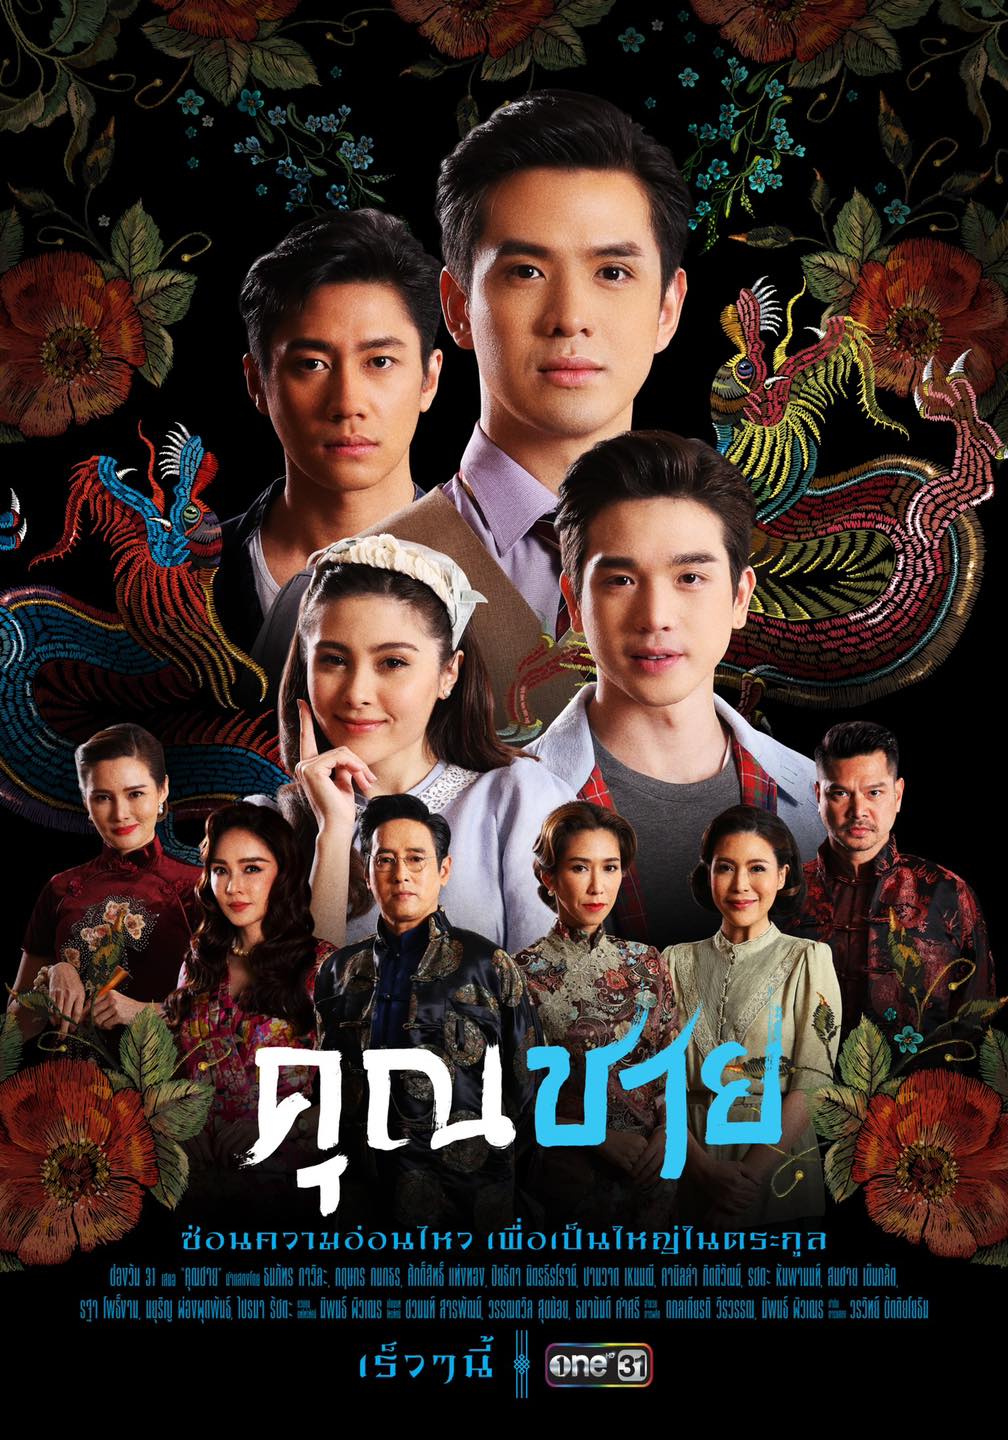 TV ratings for To Sir, With Love (คุณชาย) in Suecia. One31 TV series